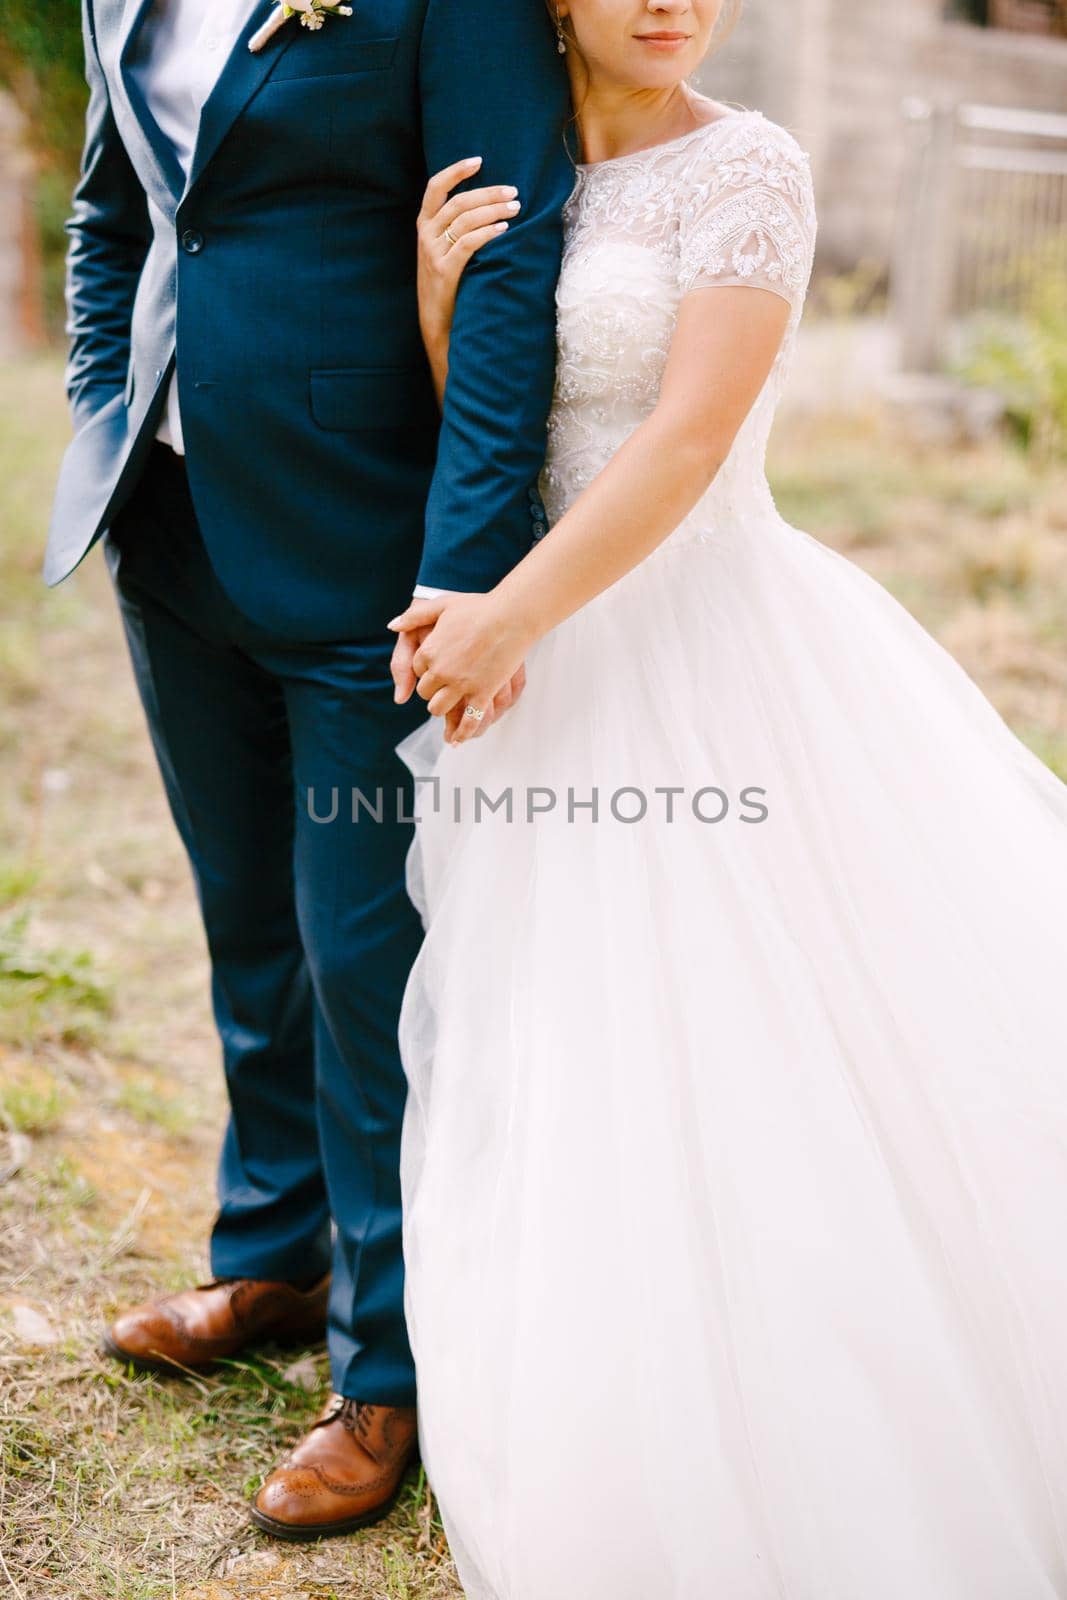 The bride and groom stand embracing, the bride holds the groom's hand and gently hugs . High quality photo